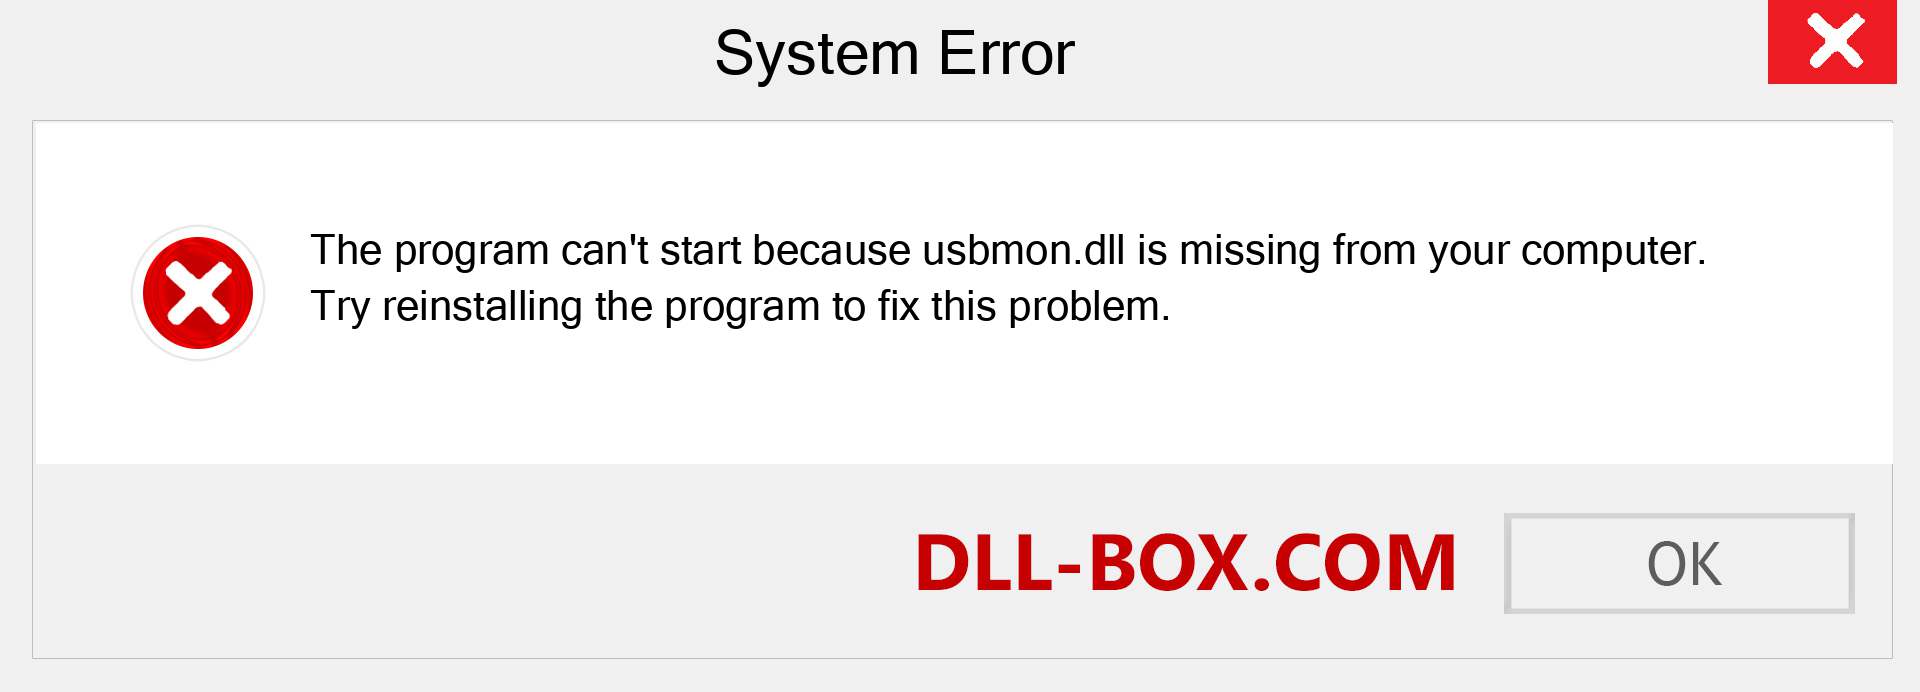  usbmon.dll file is missing?. Download for Windows 7, 8, 10 - Fix  usbmon dll Missing Error on Windows, photos, images